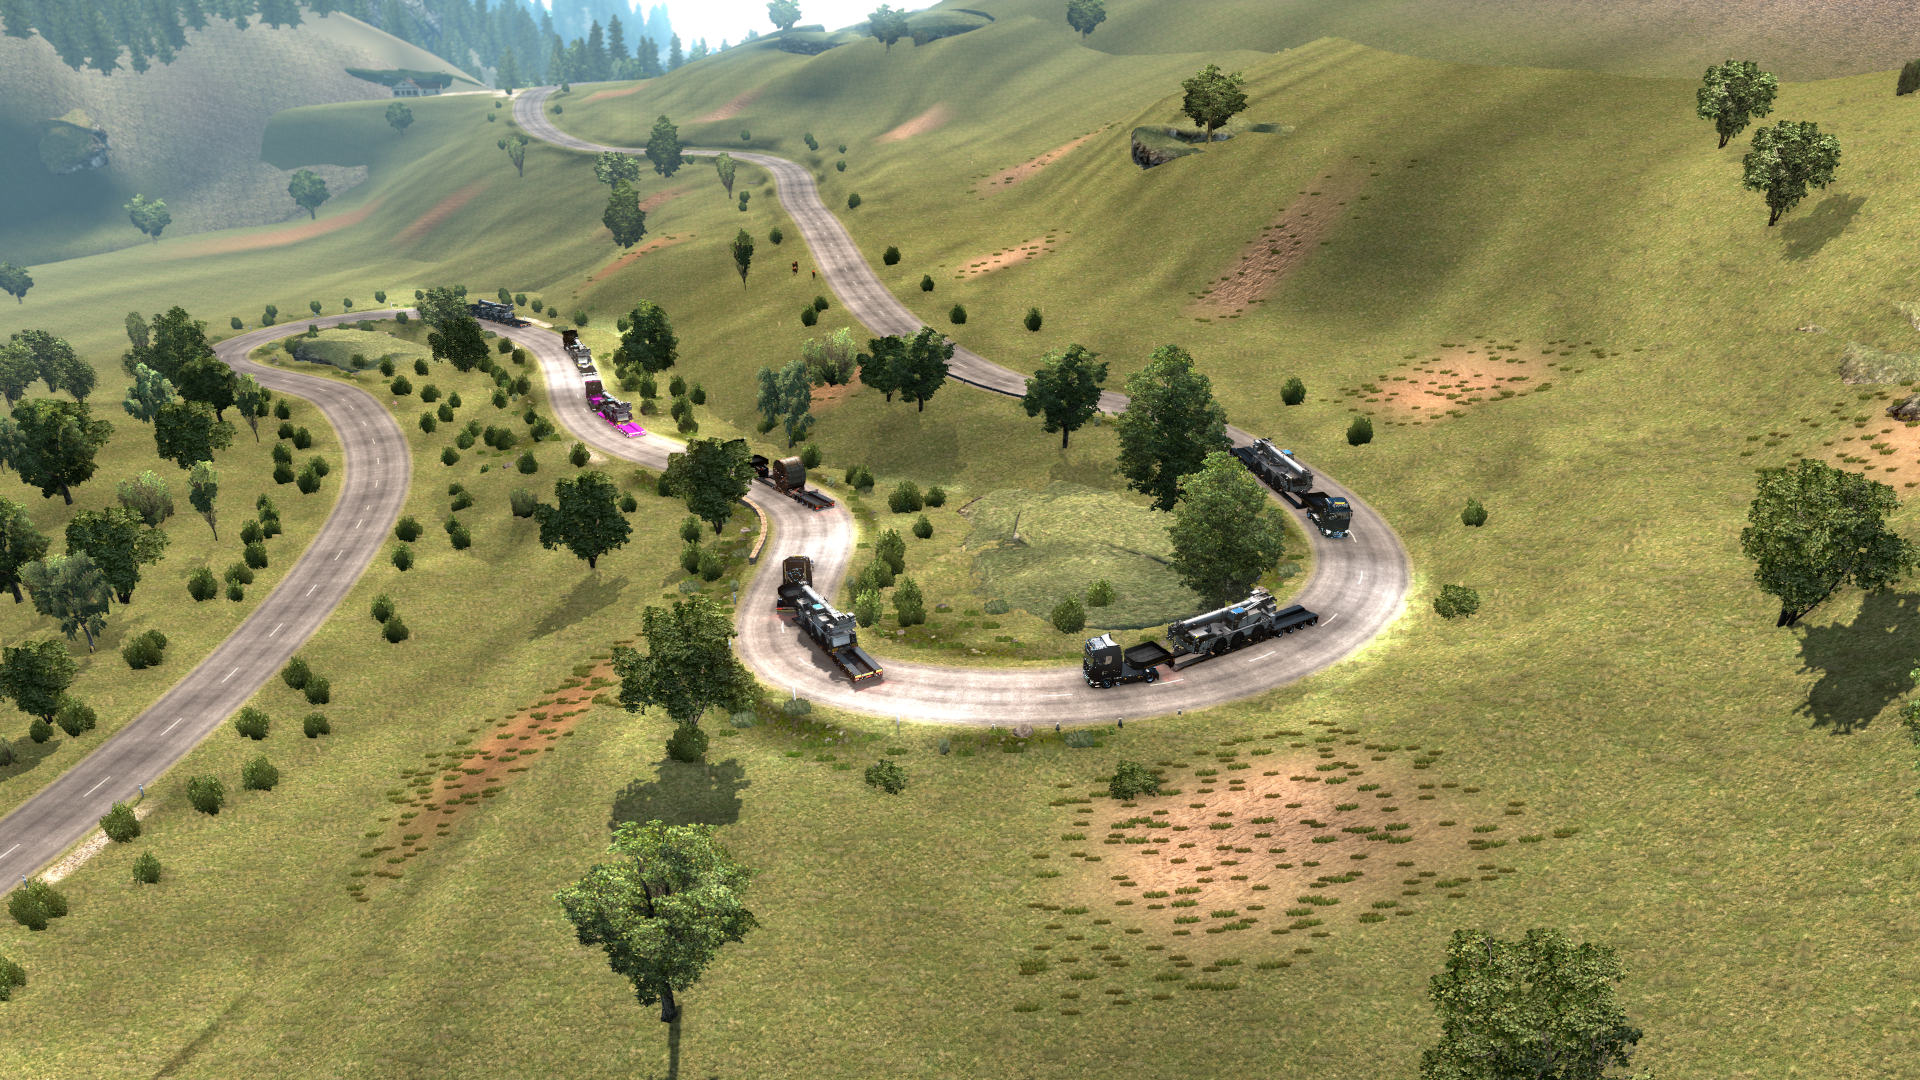 ets2_20210327_233905_00.png